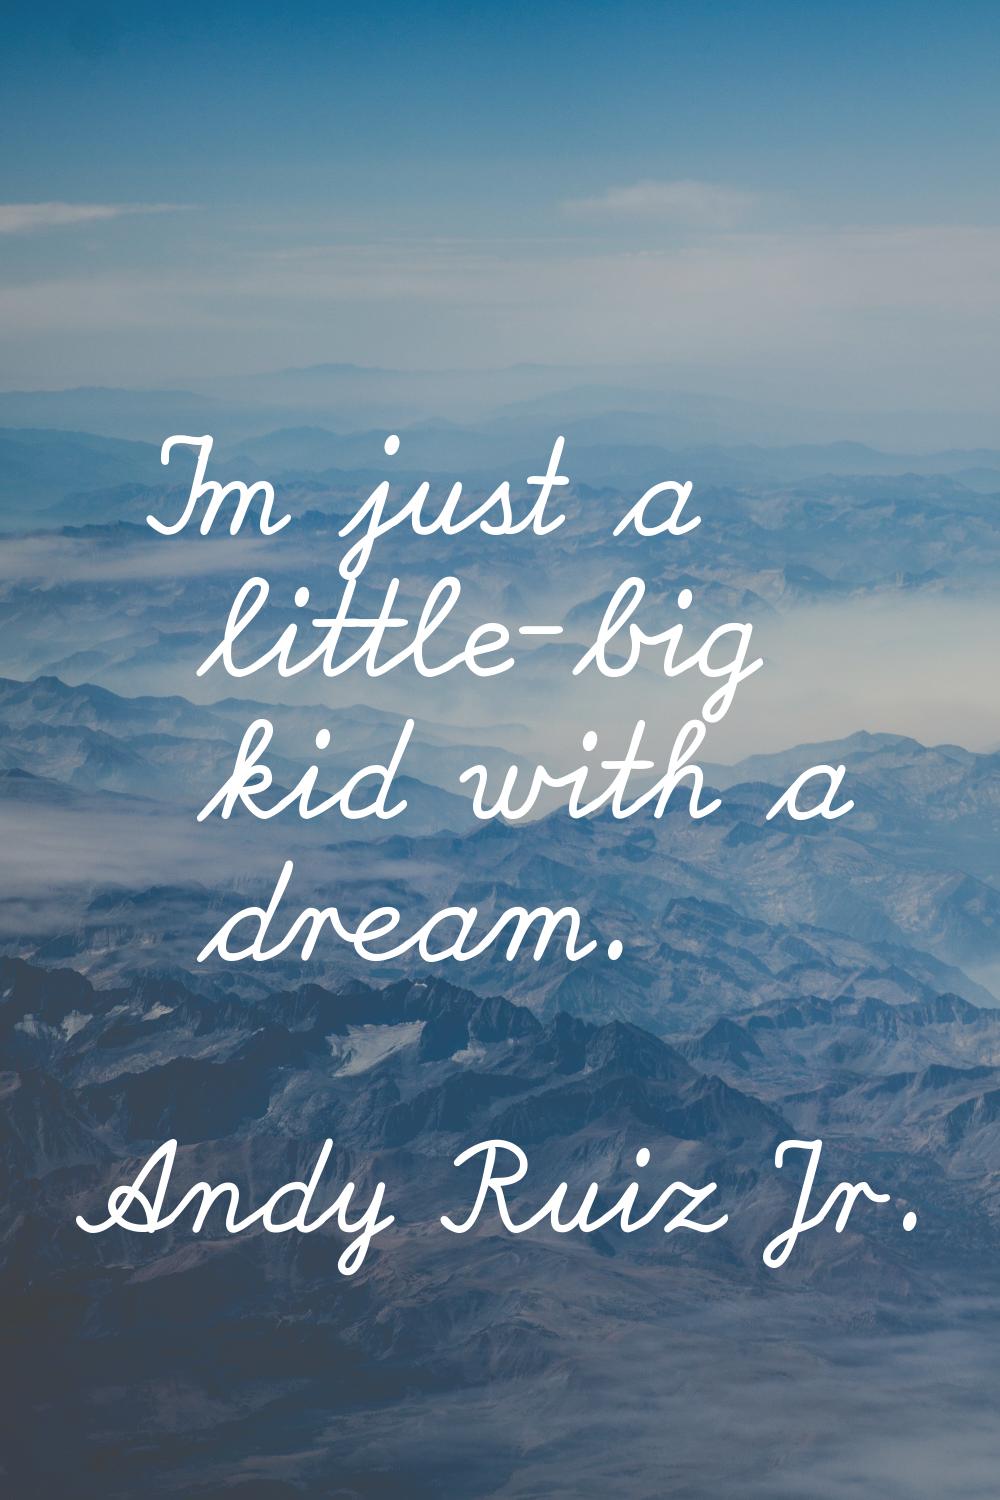 I'm just a little-big kid with a dream.